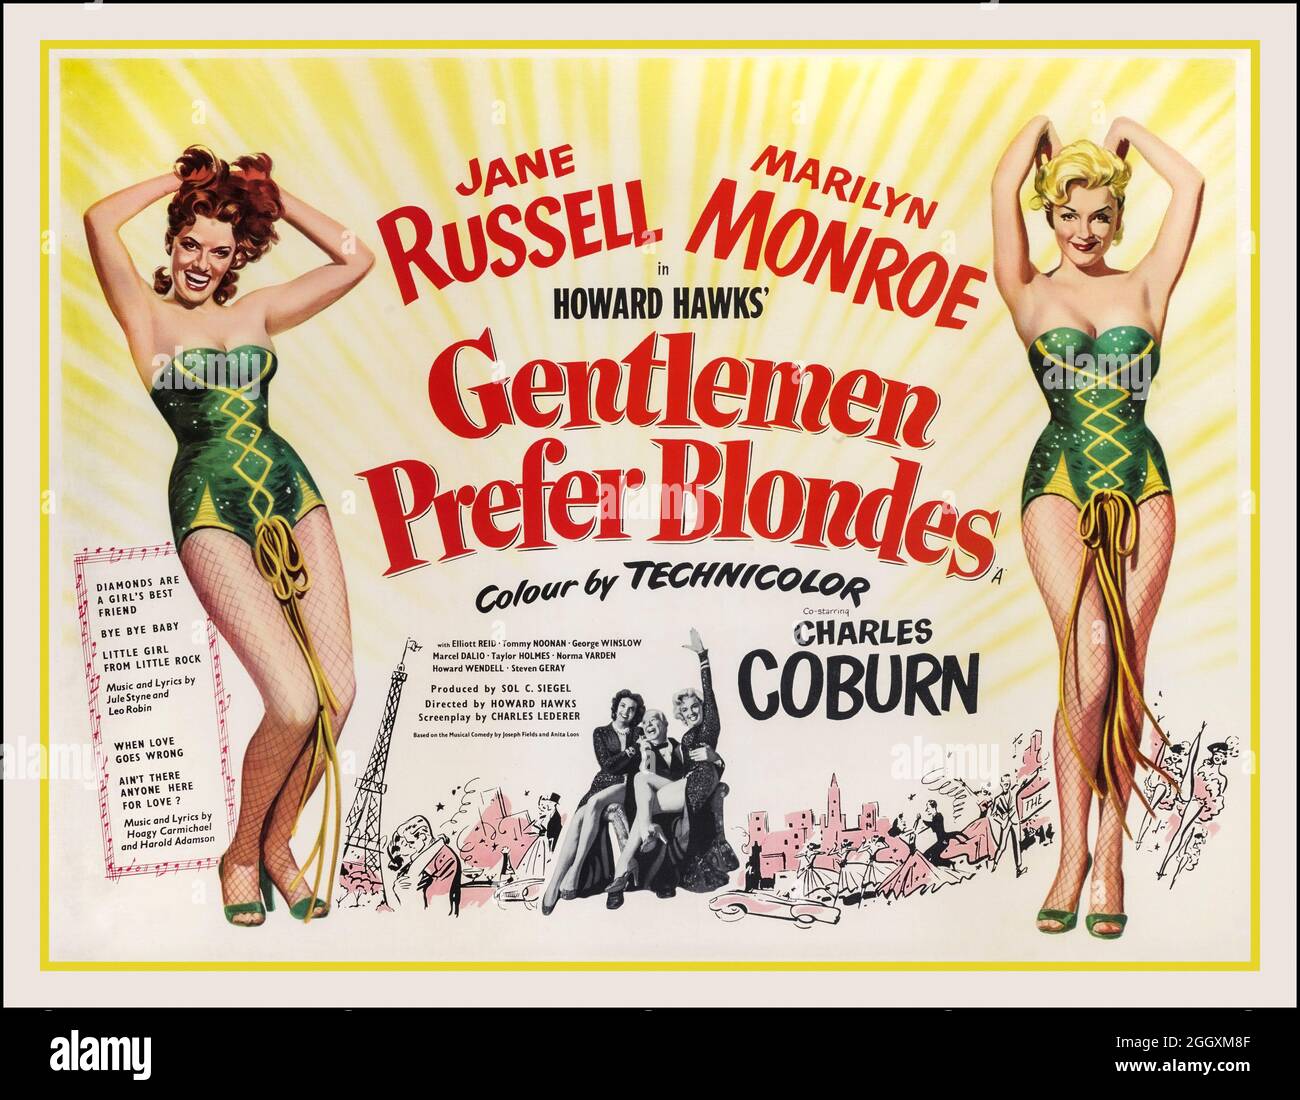 Vintage Movie Film Poster 'Gentlemen Prefer Blonds' starring Jane Russell & Marilyn Monroe with James Coburn Directed by Howard Hawks Gentlemen Prefer Blondes is a 1953 American musical comedy film based on the 1949 stage musical of the same name. It was directed by Howard Hawks Stock Photo